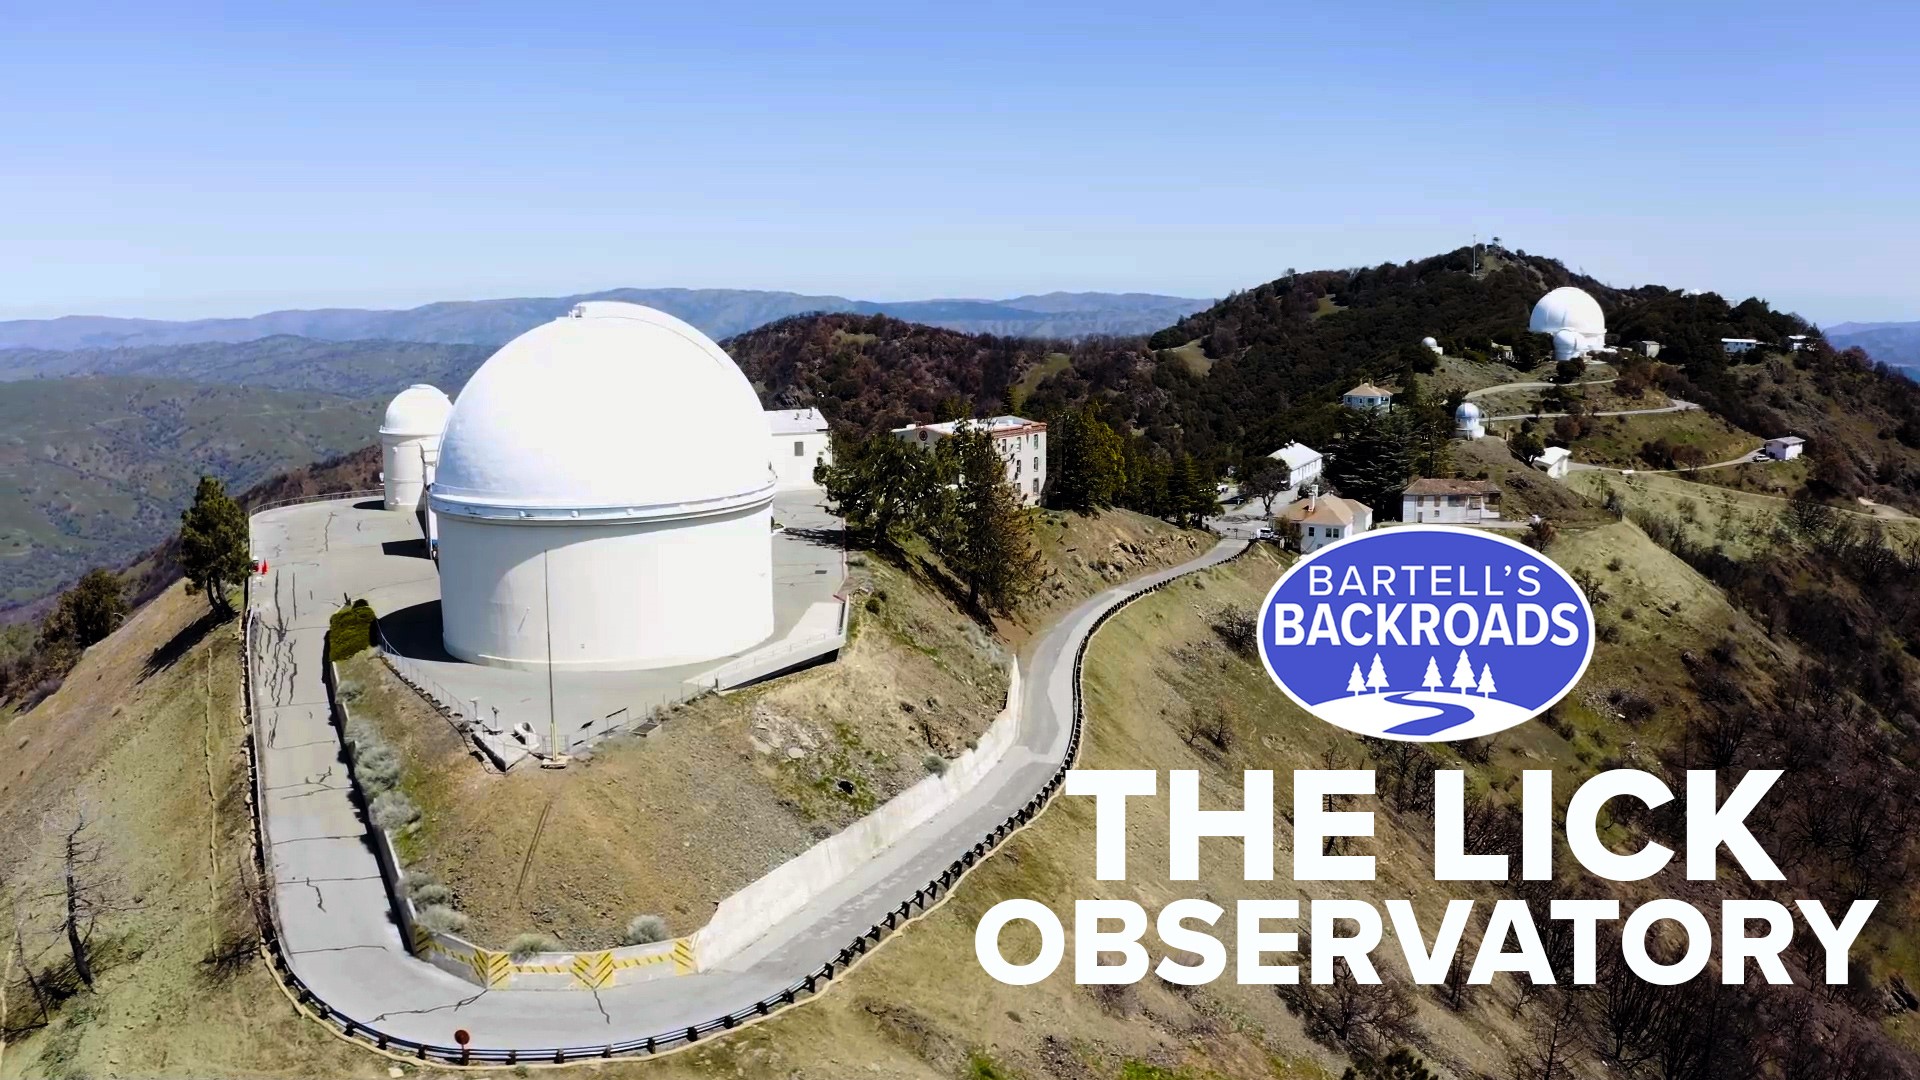 'The pinnacle of technology in 1888' is still alive at the Lick Observatory in Silicon Valley. It cost the equivalent of $1.2 billion in 2021 dollars to build.